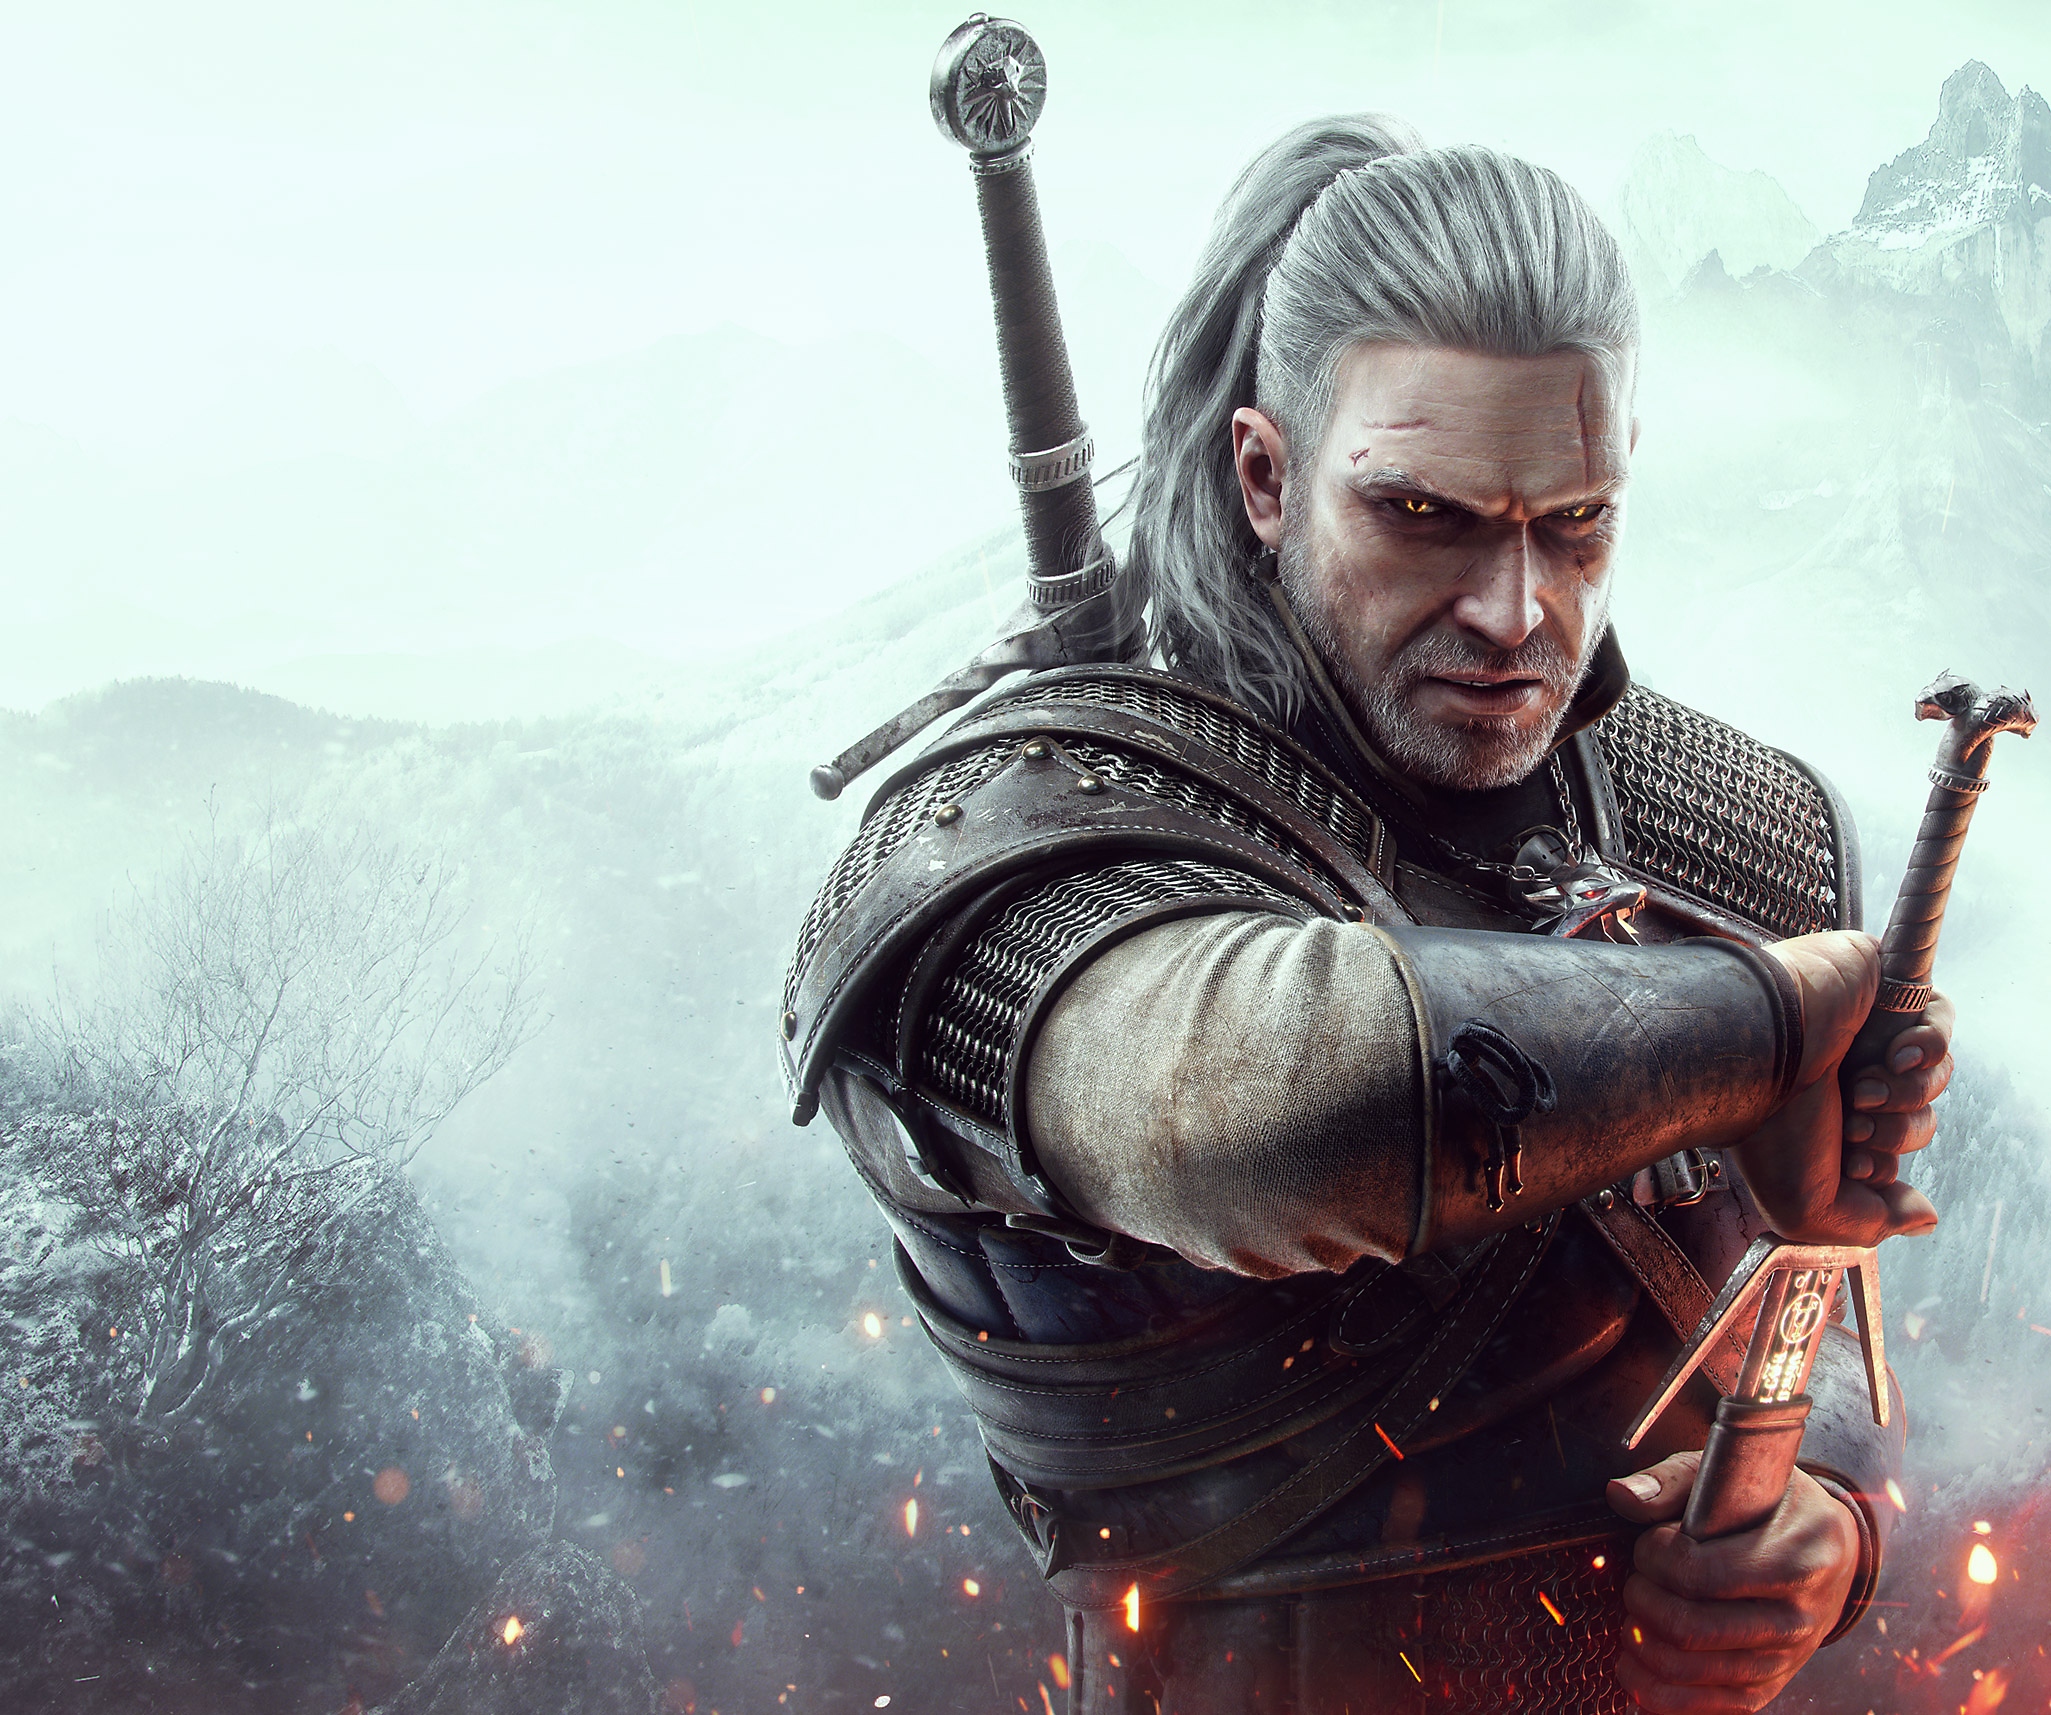 The Witcher 3 key art featuring main character Geralt of Rivia drawing his sword.